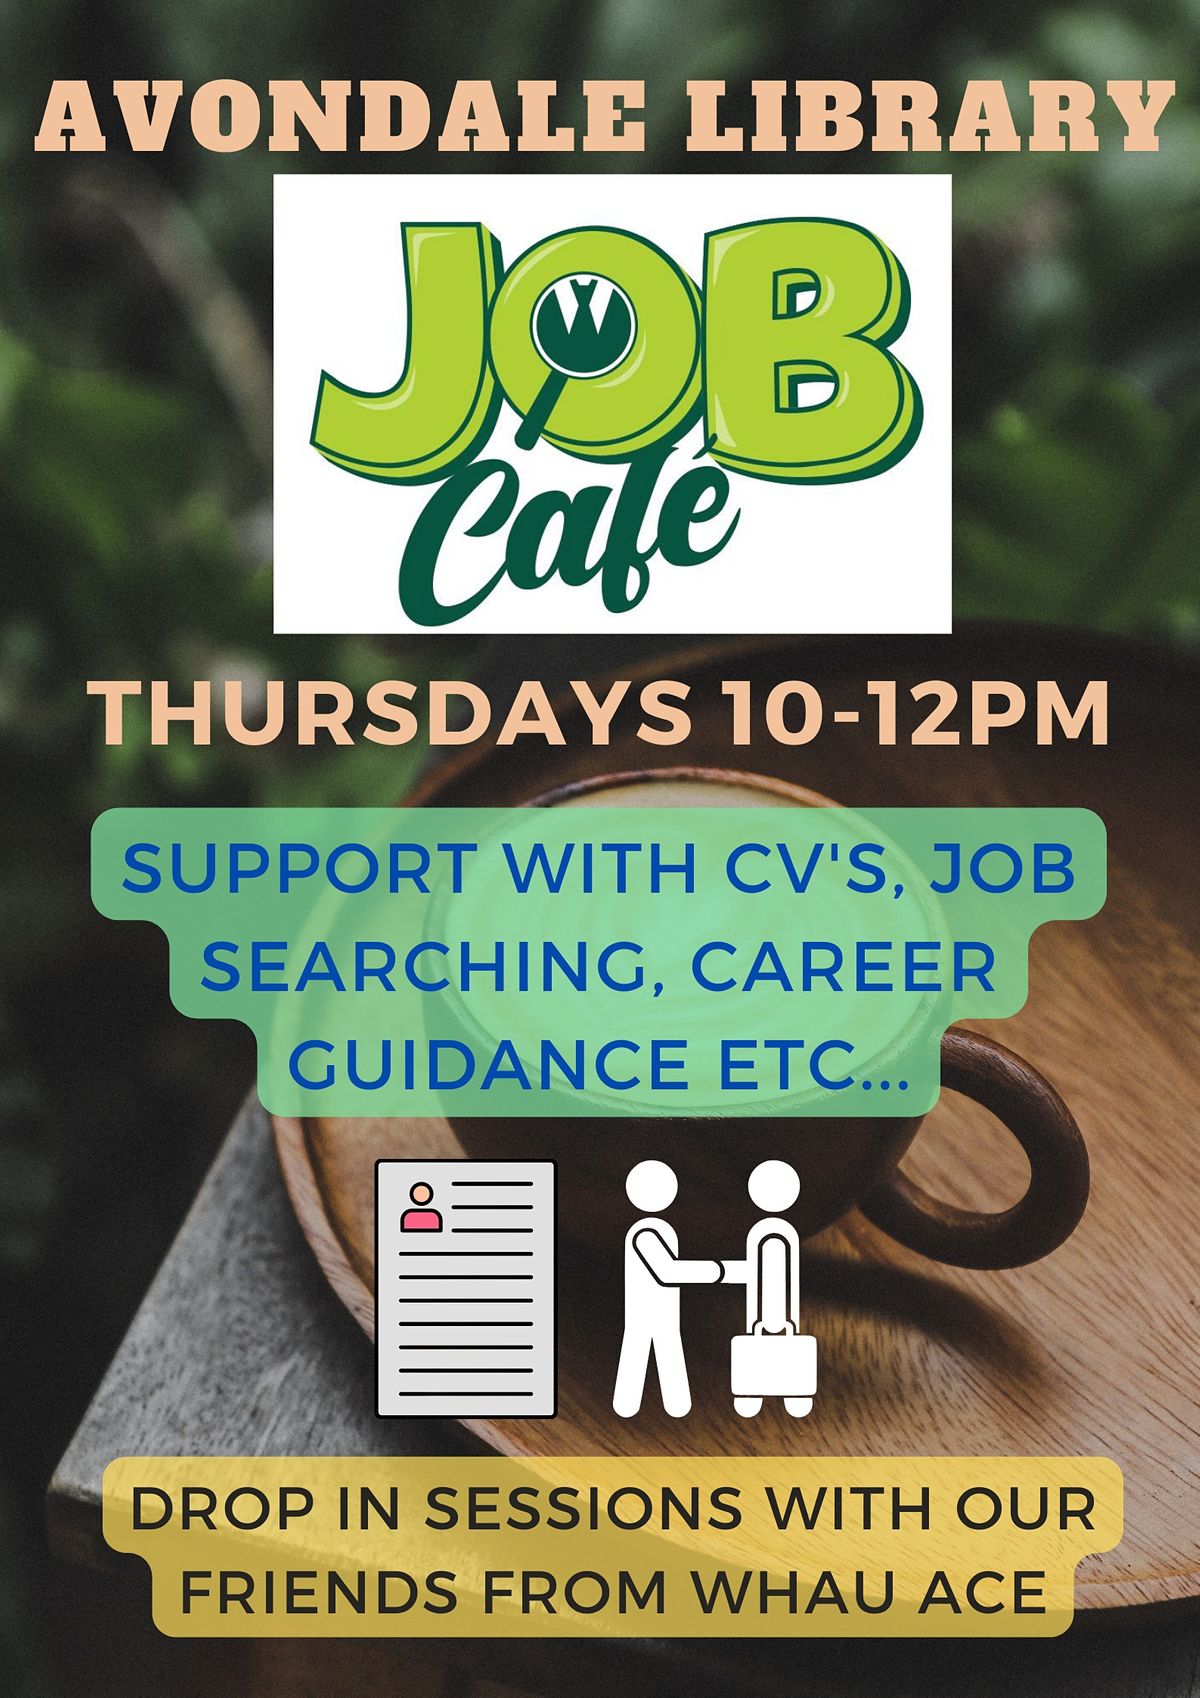 Job Cafe at Avondale Library